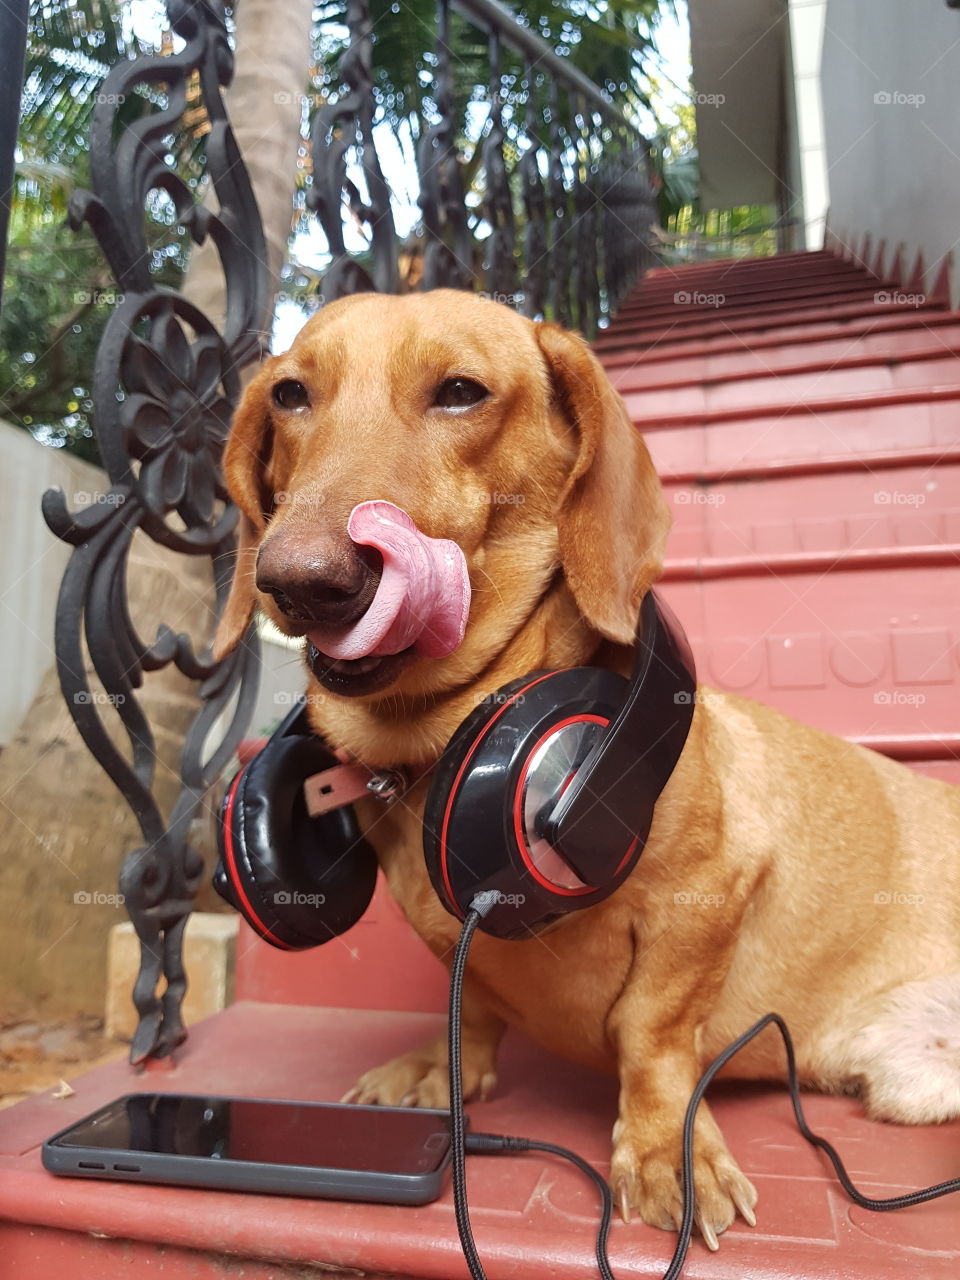 dog life and music life combined. living life.